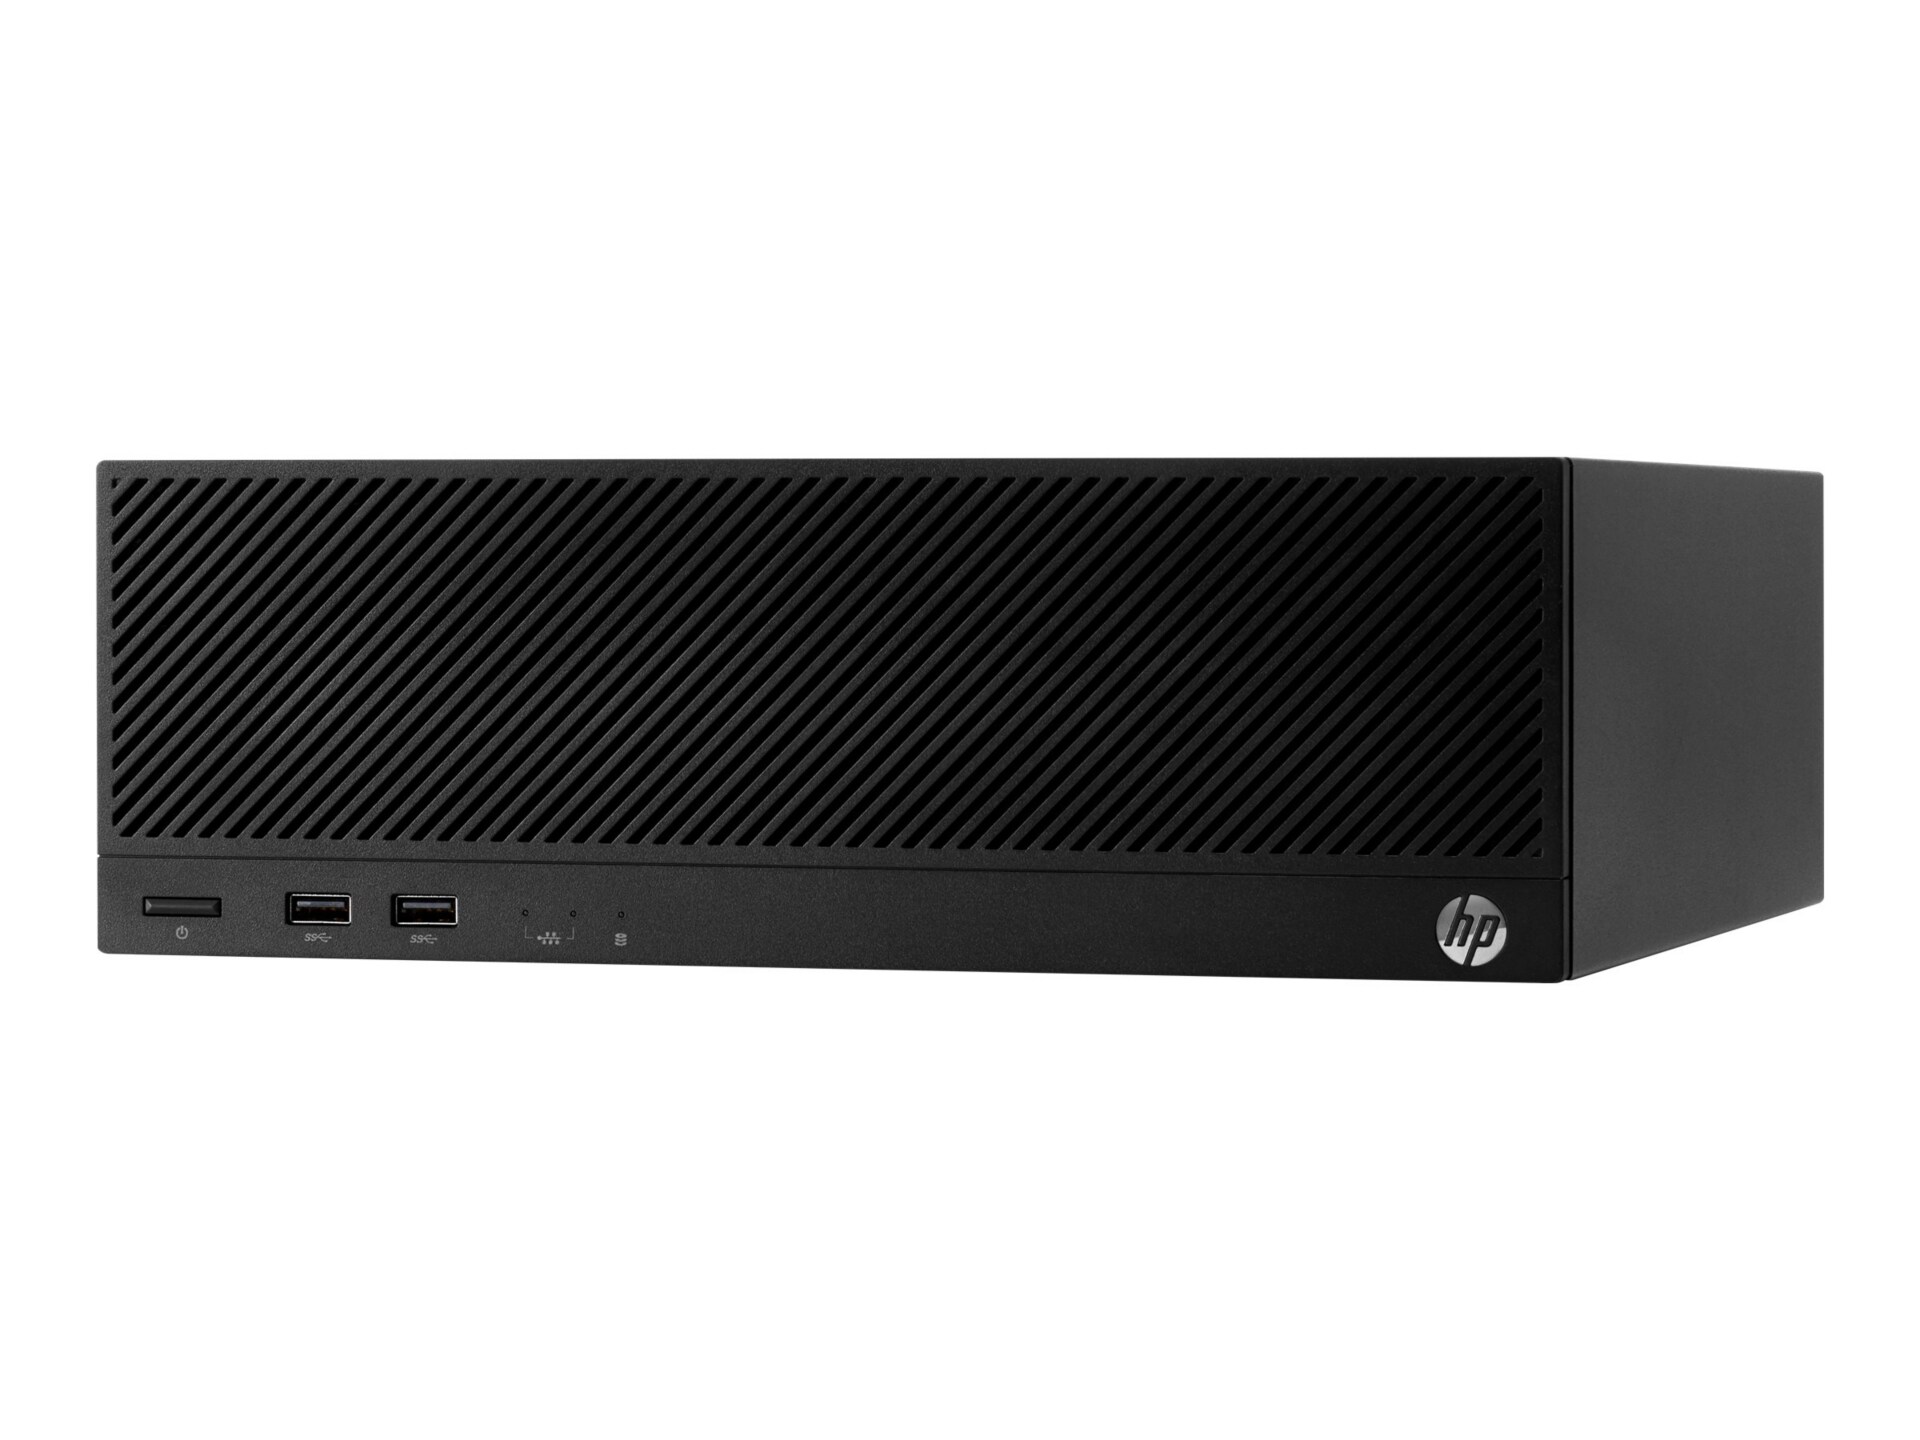 HP Engage Flex Pro-C Retail System - USFF - Core i5 8500 3 GHz - vPro - 8 G